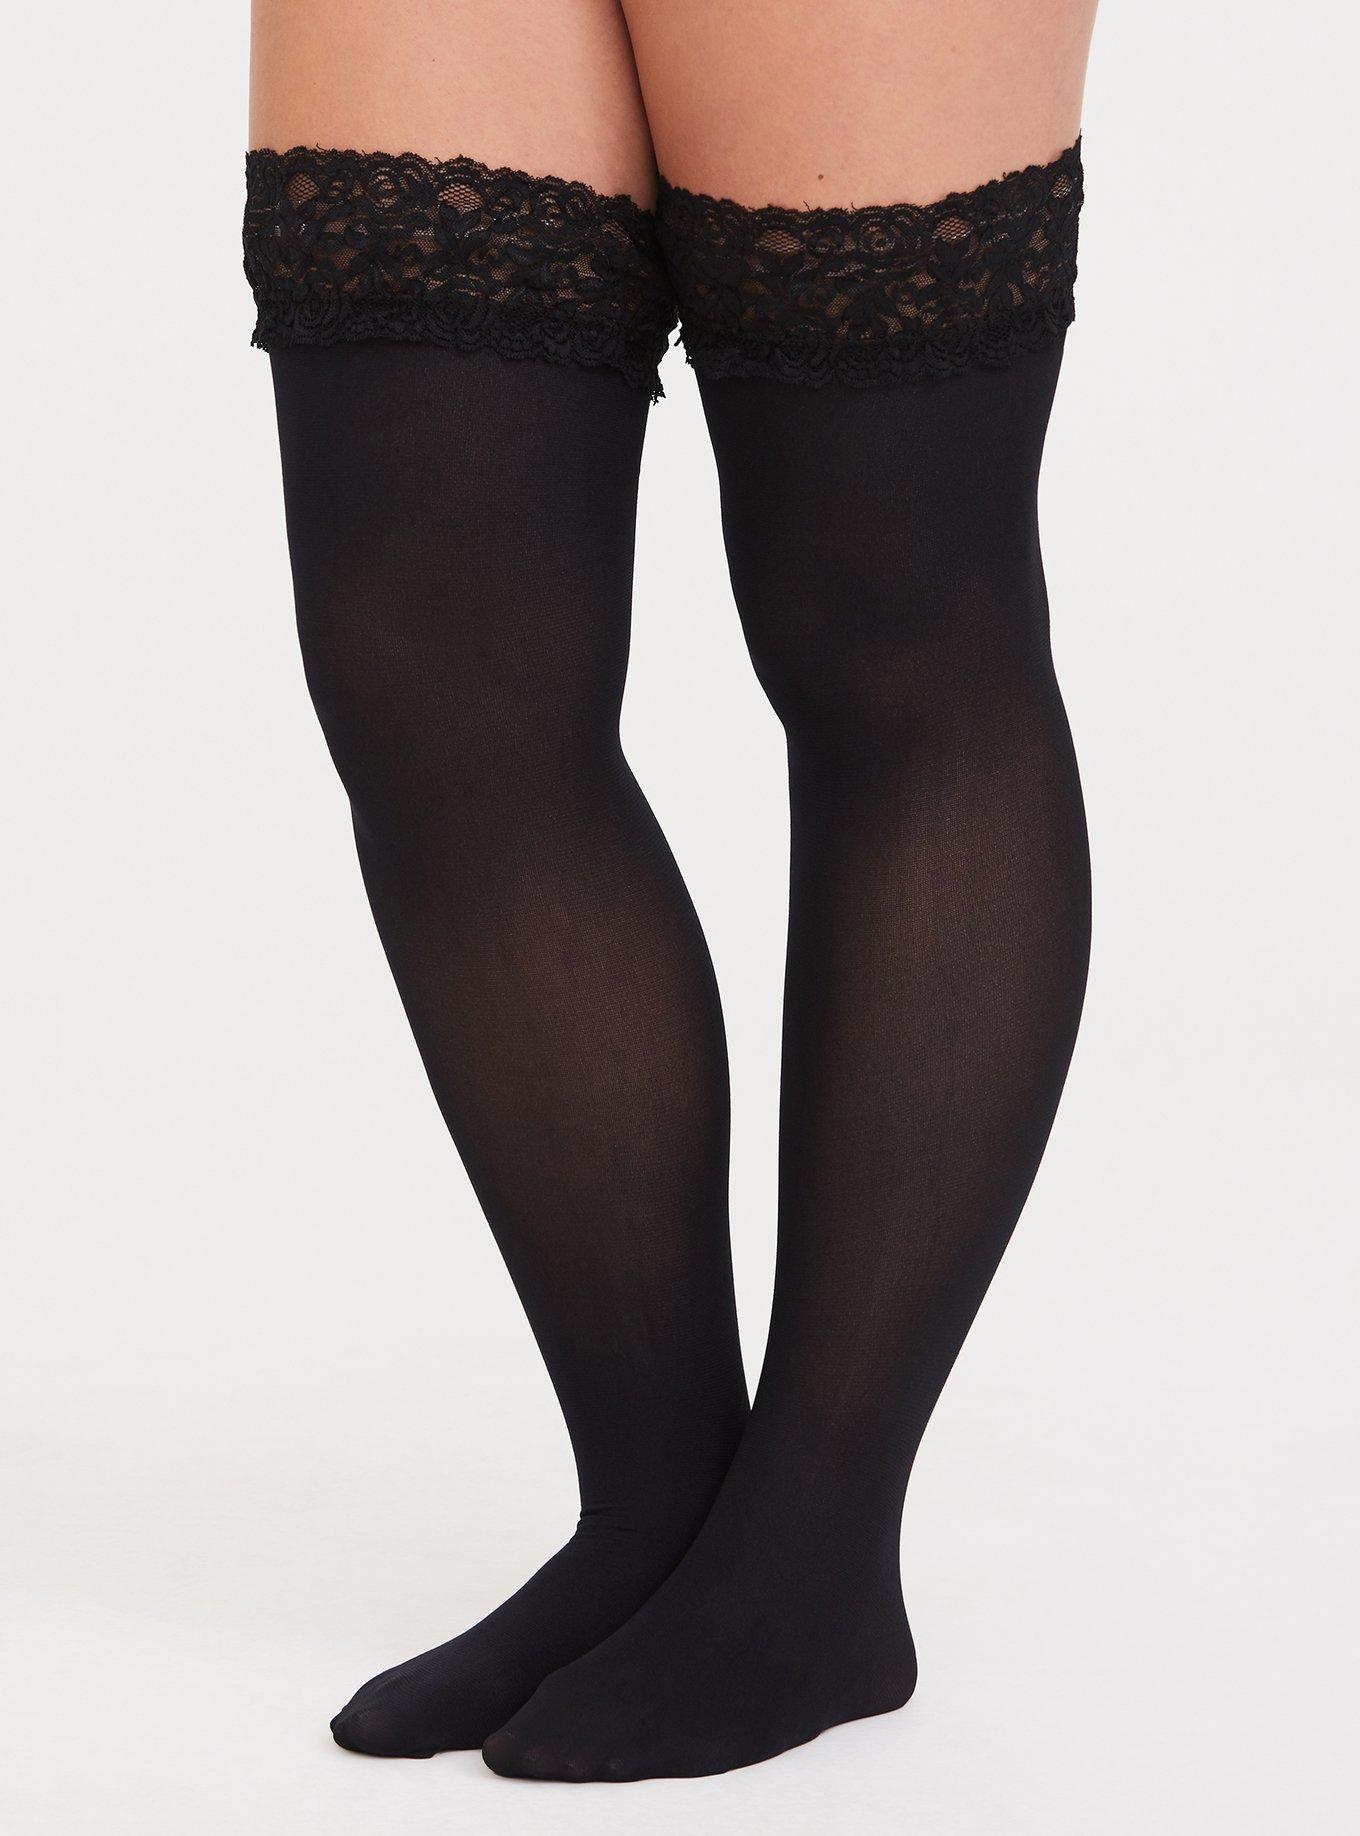 Swedish Stockings Edith Lace Tight  Urban Outfitters Singapore Official  Site